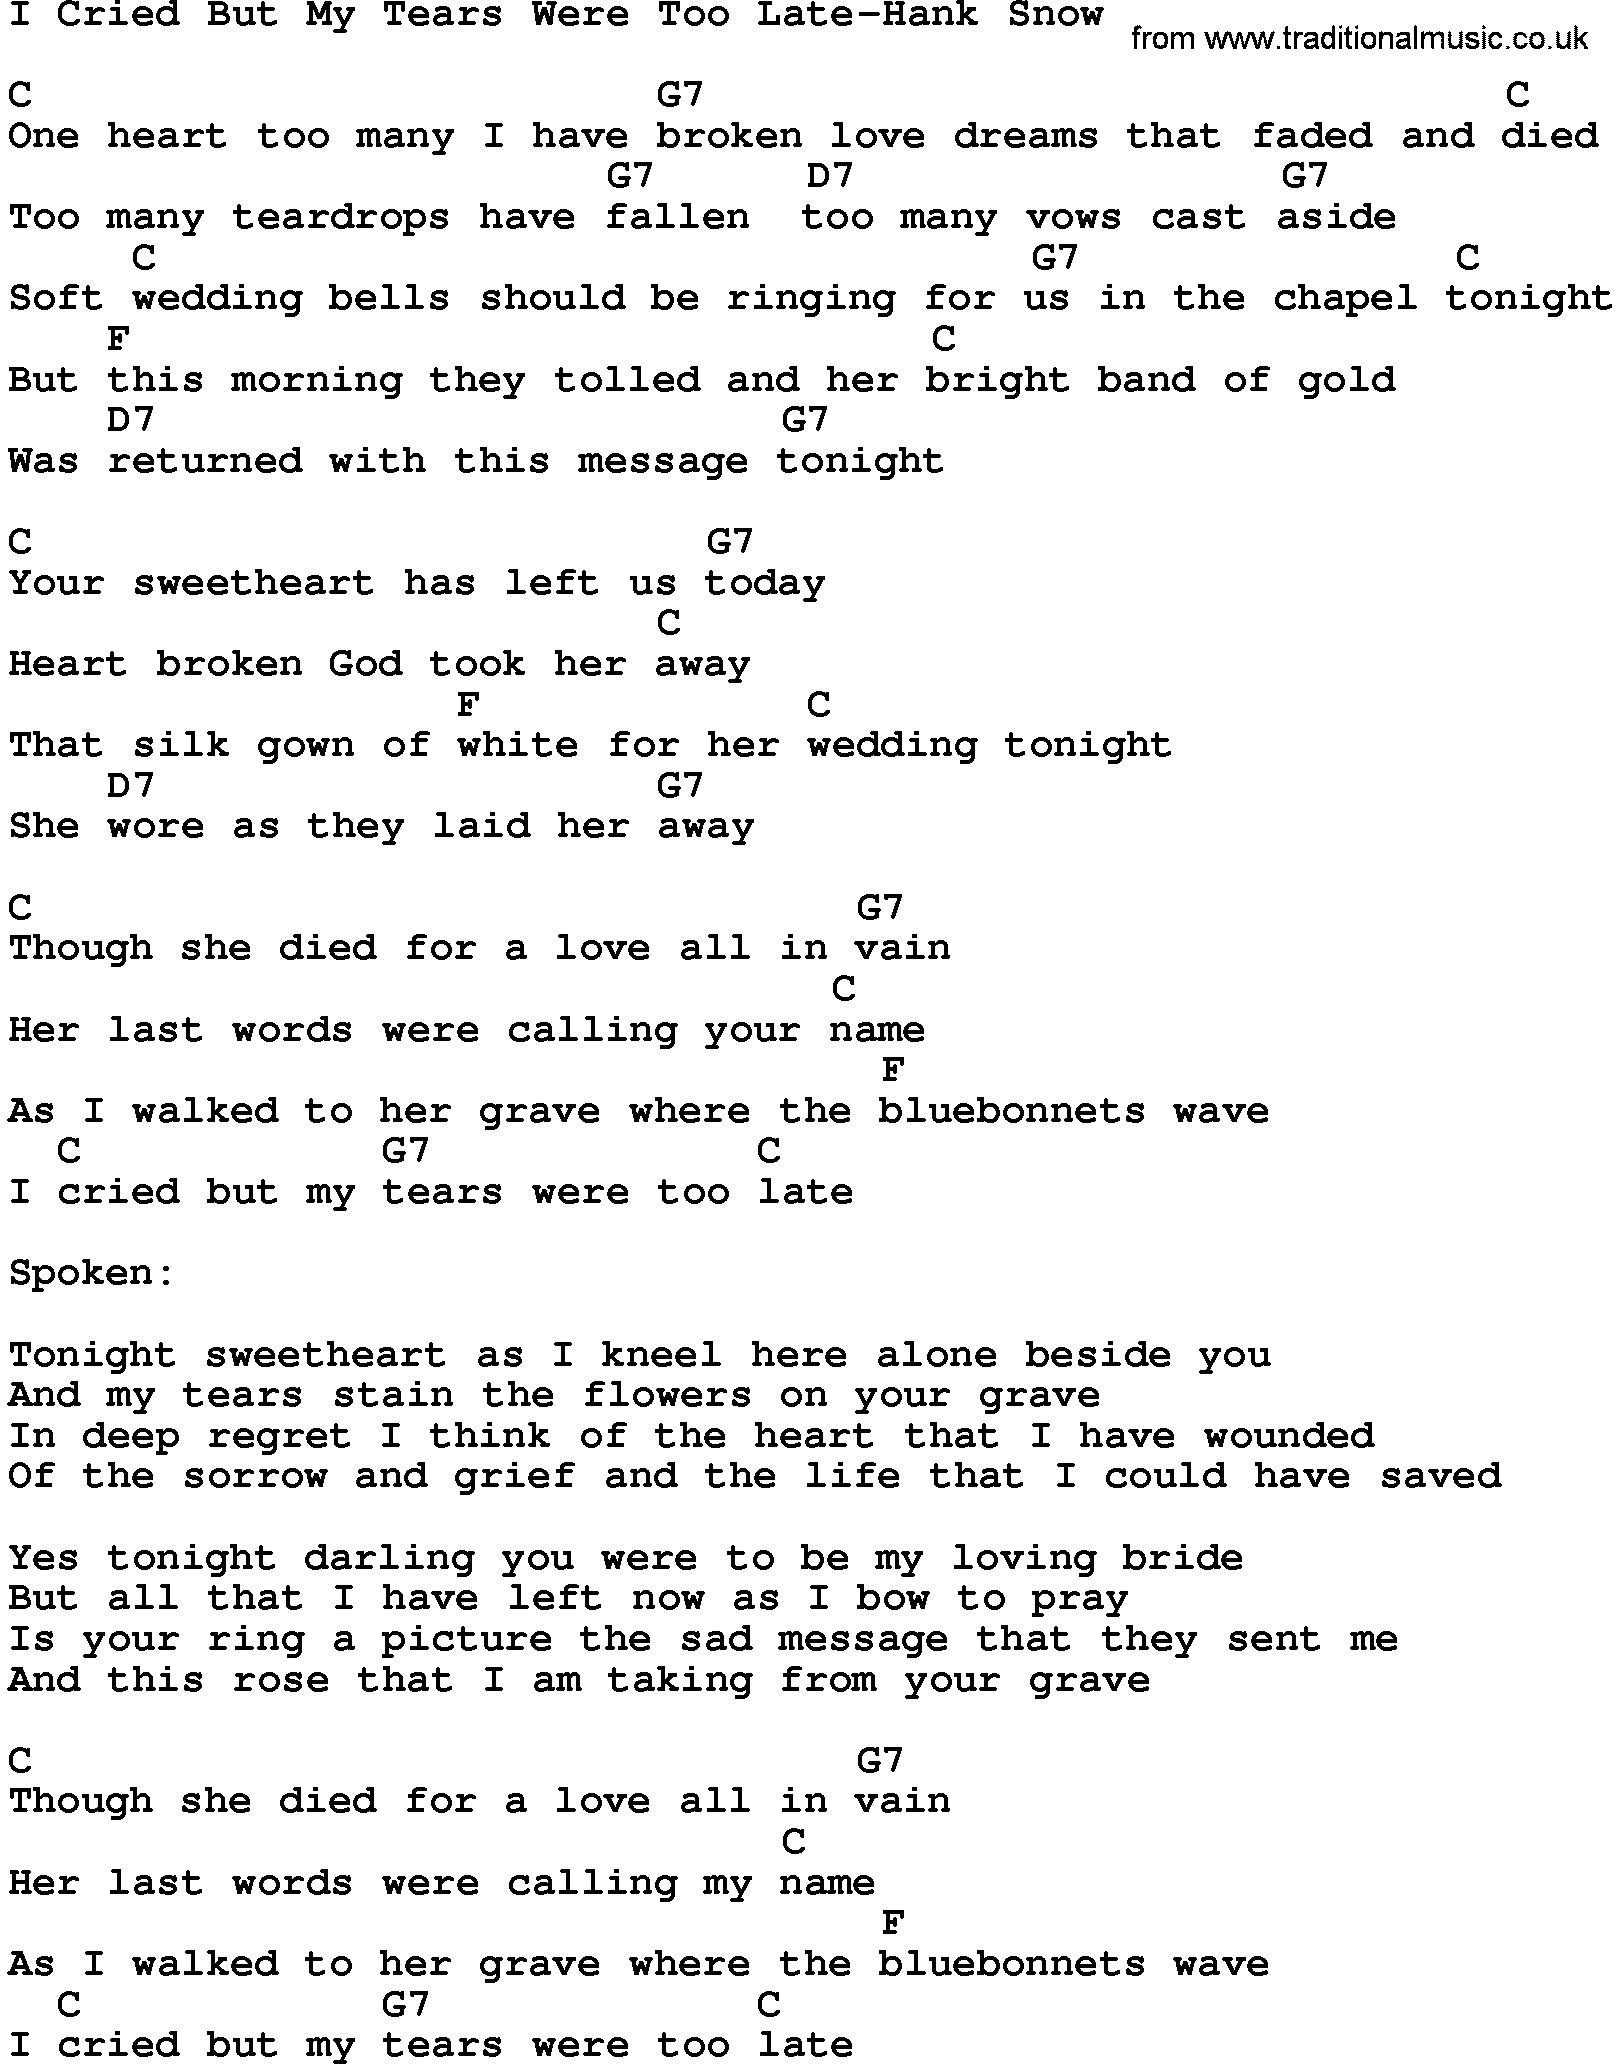 Country music song: I Cried But My Tears Were Too Late-Hank Snow lyrics and chords